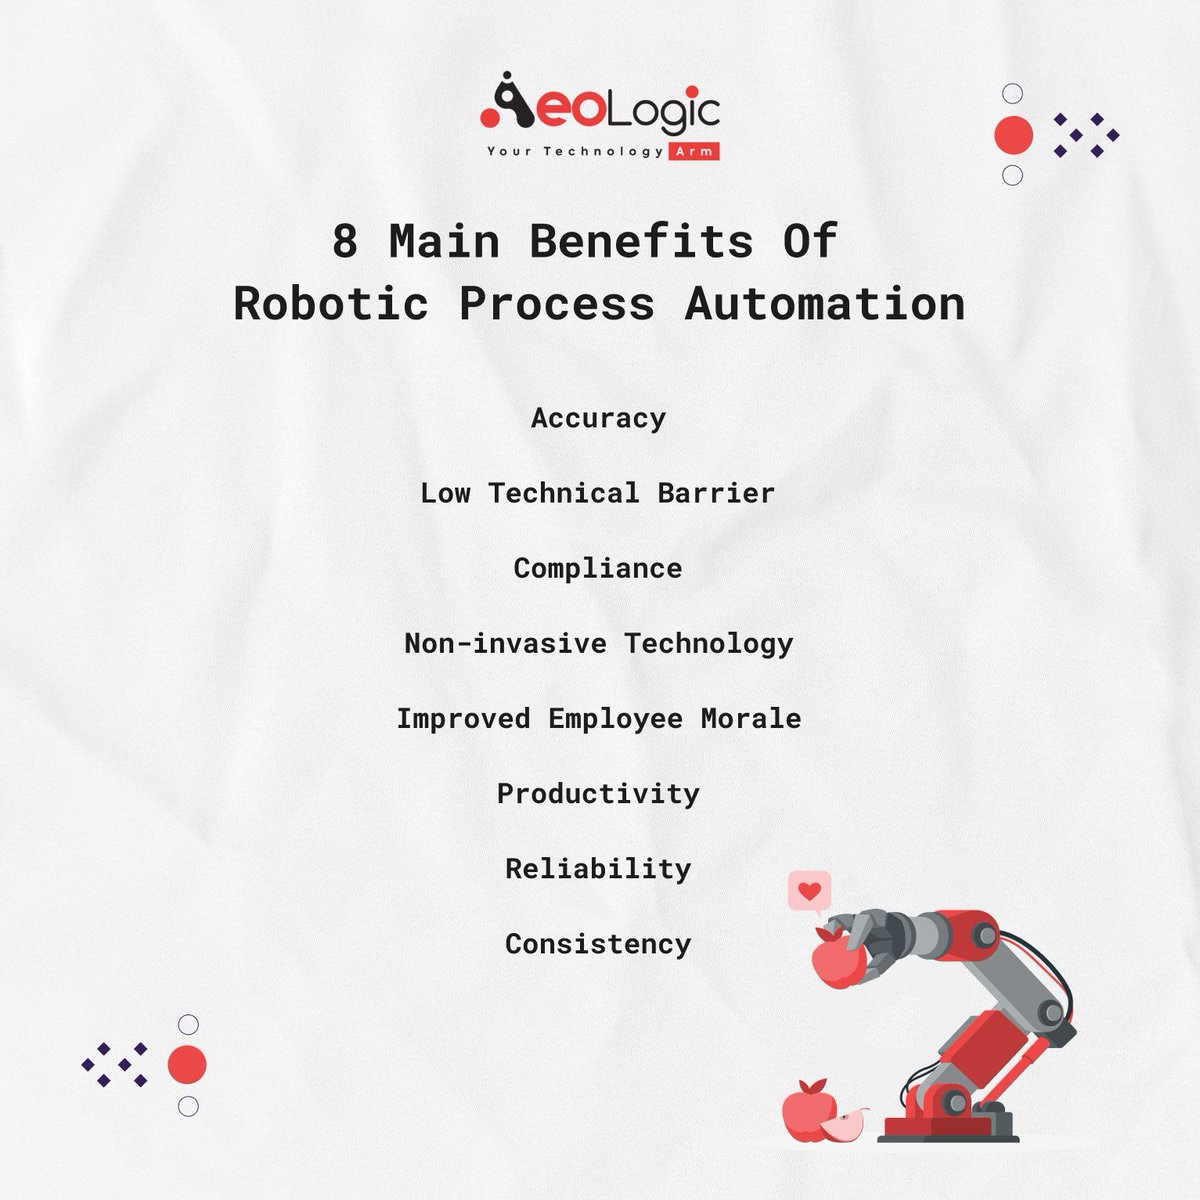 Top Benefits of Robotic Process Automation

Interested in exploring how RPA can revolutionize your business processes?

📞 Contact us at +91-120-3200058
📧 Email us at support@aeologic.com

#RoboticProcessAutomation #DigitalTransformation #BusinessEfficiency  #TechSolutions